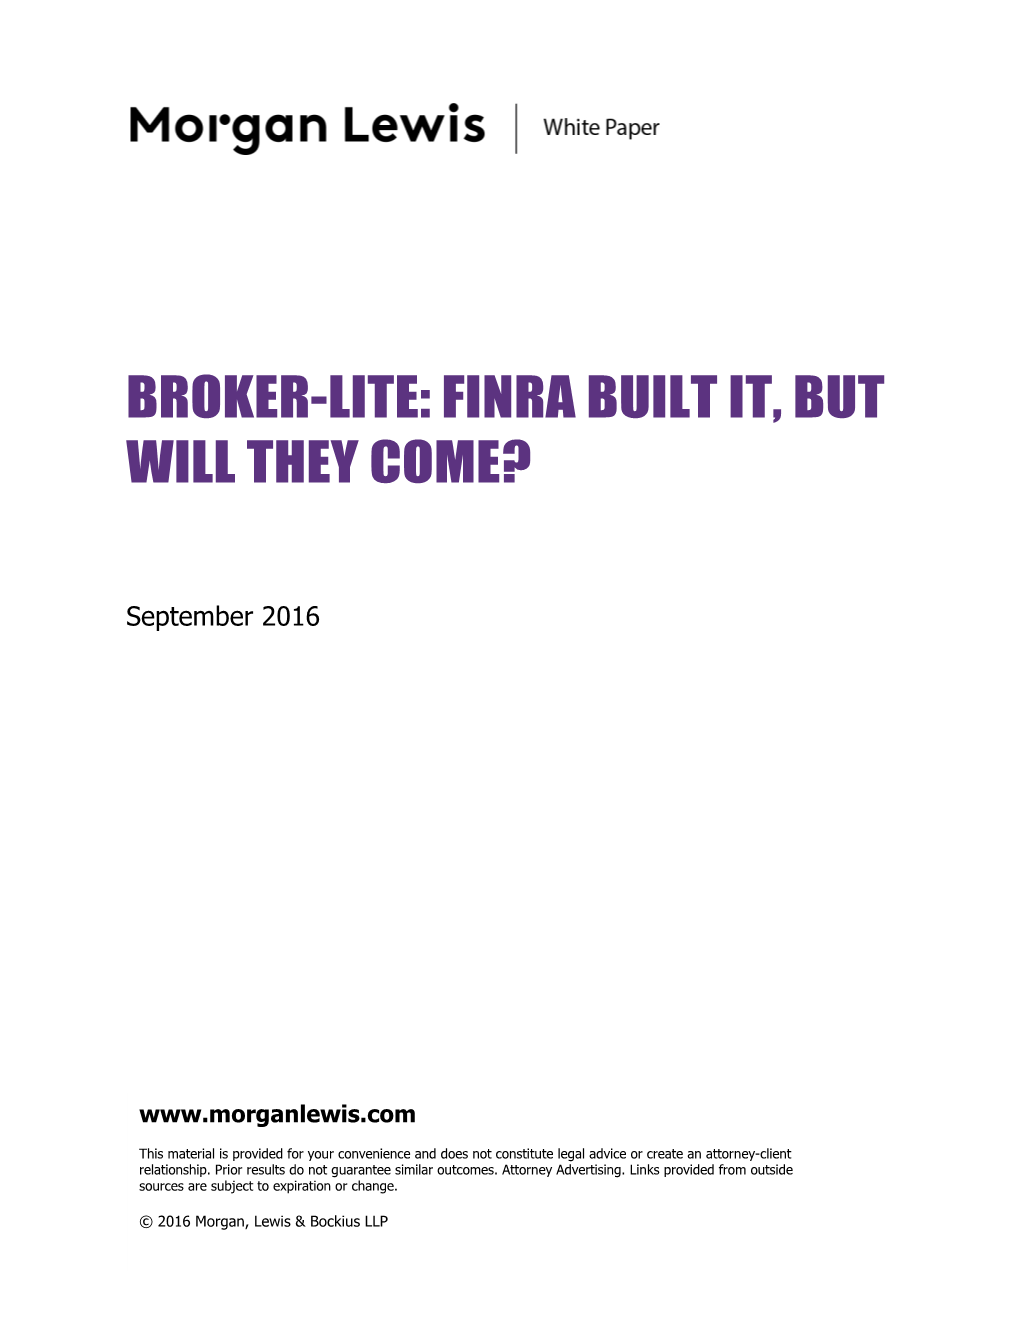 Broker-Lite: Finra Built It, but Will They Come?